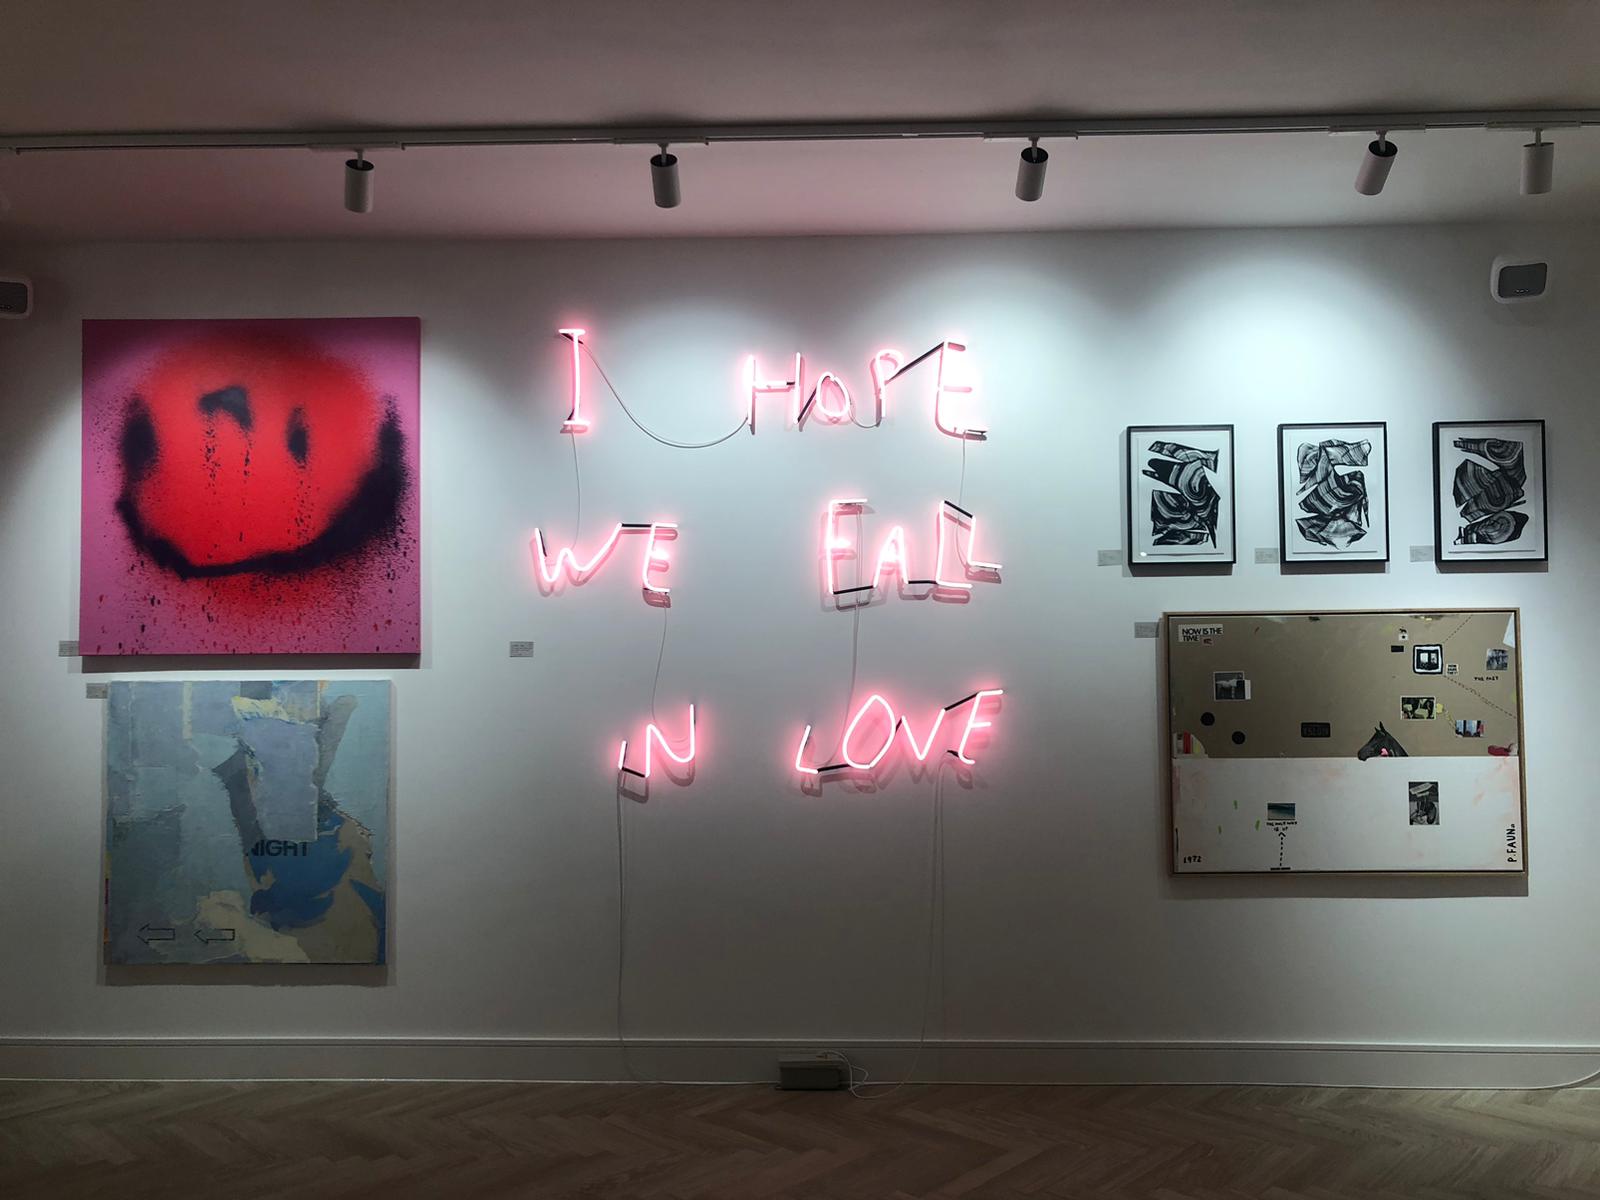 Art on wall including a neon sign which says I hope we fall in love at Helm Art Gallery in Brighton